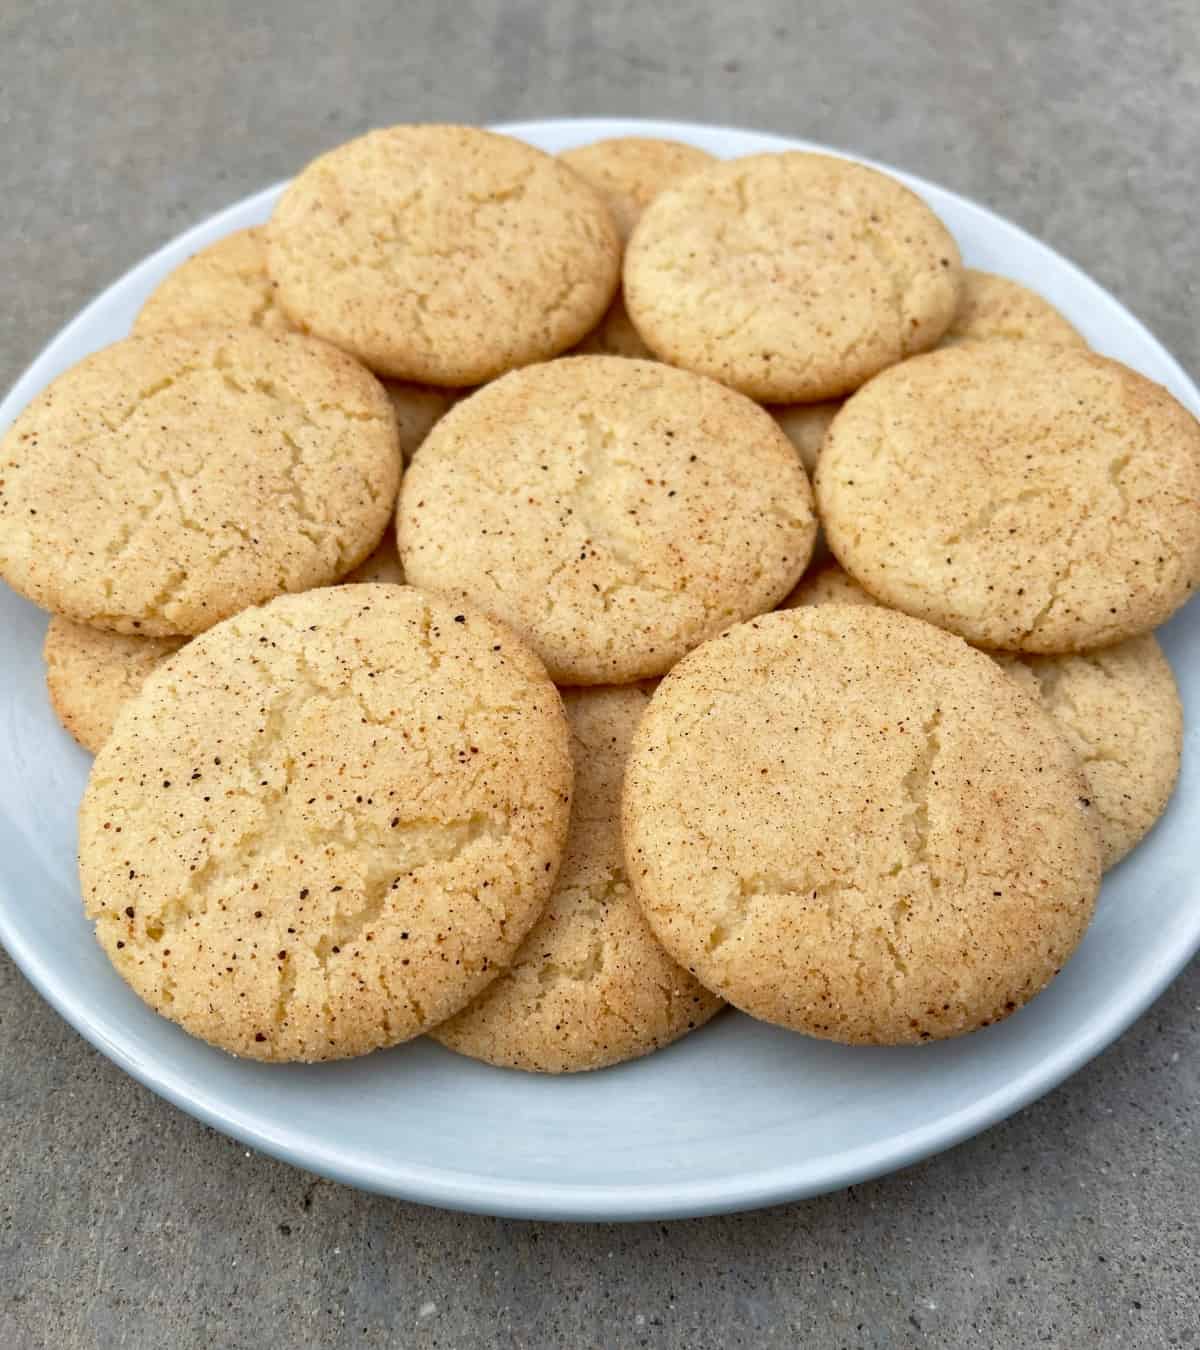 Fresh baked eggnog snickerdoodles on round blue plate.